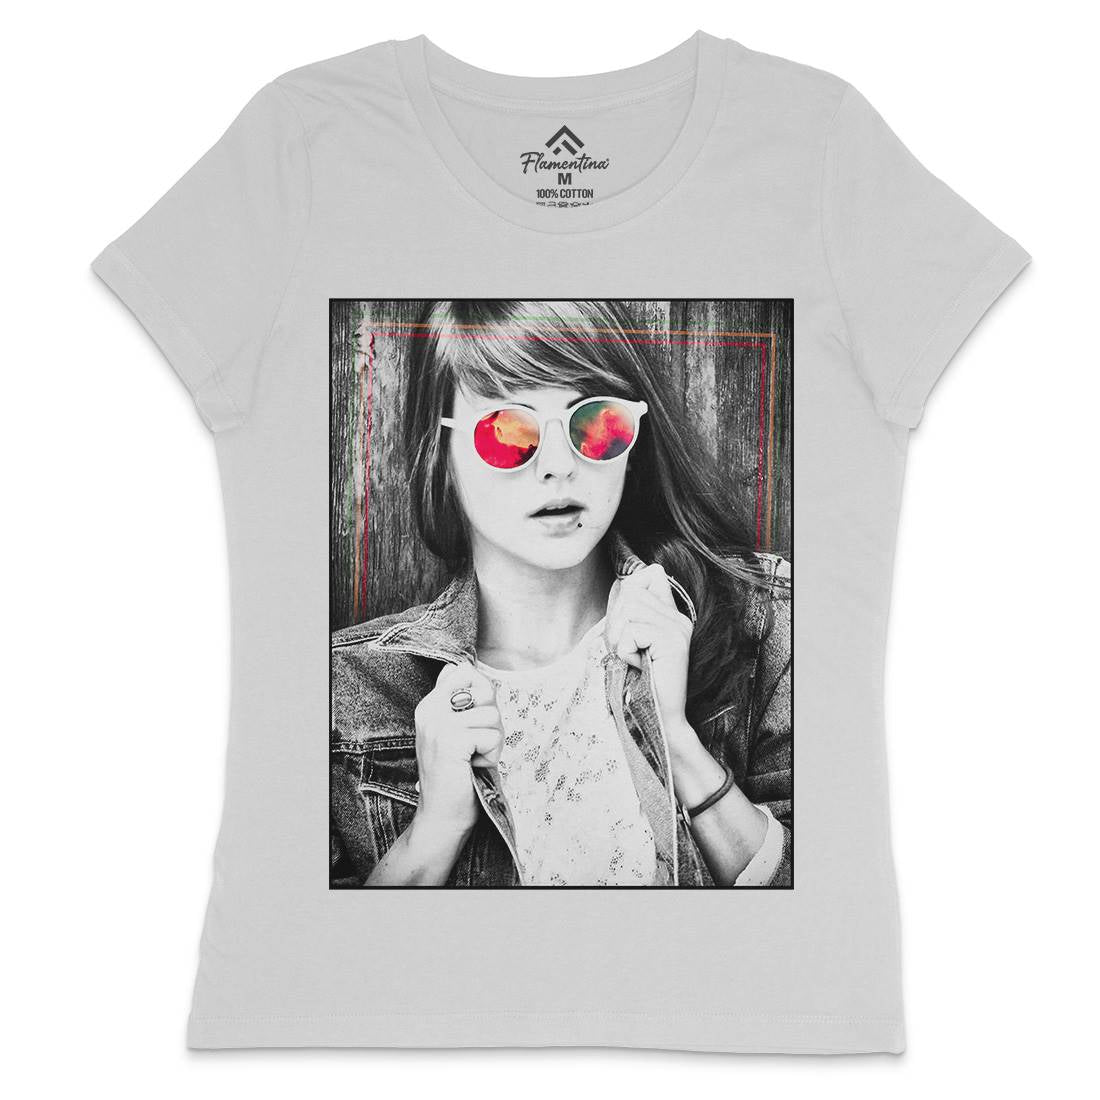 Seeing Is Believing Womens Crew Neck T-Shirt Art A904